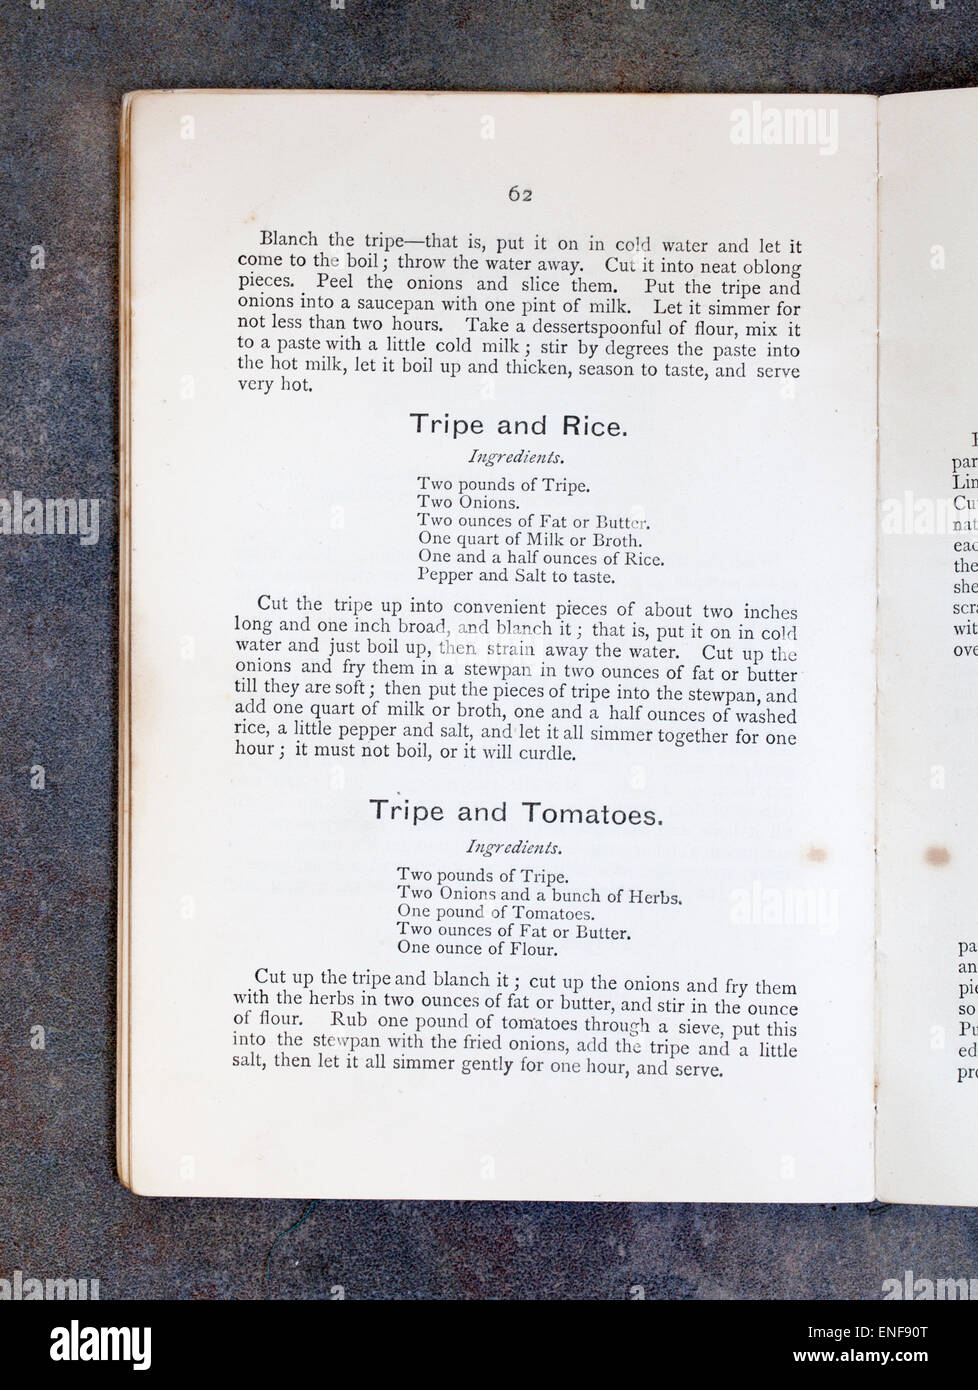 Tripe and Rice from Plain Cookery Recipes Book by Mrs Charles Clarke for the National Training School for Cookery Stock Photo